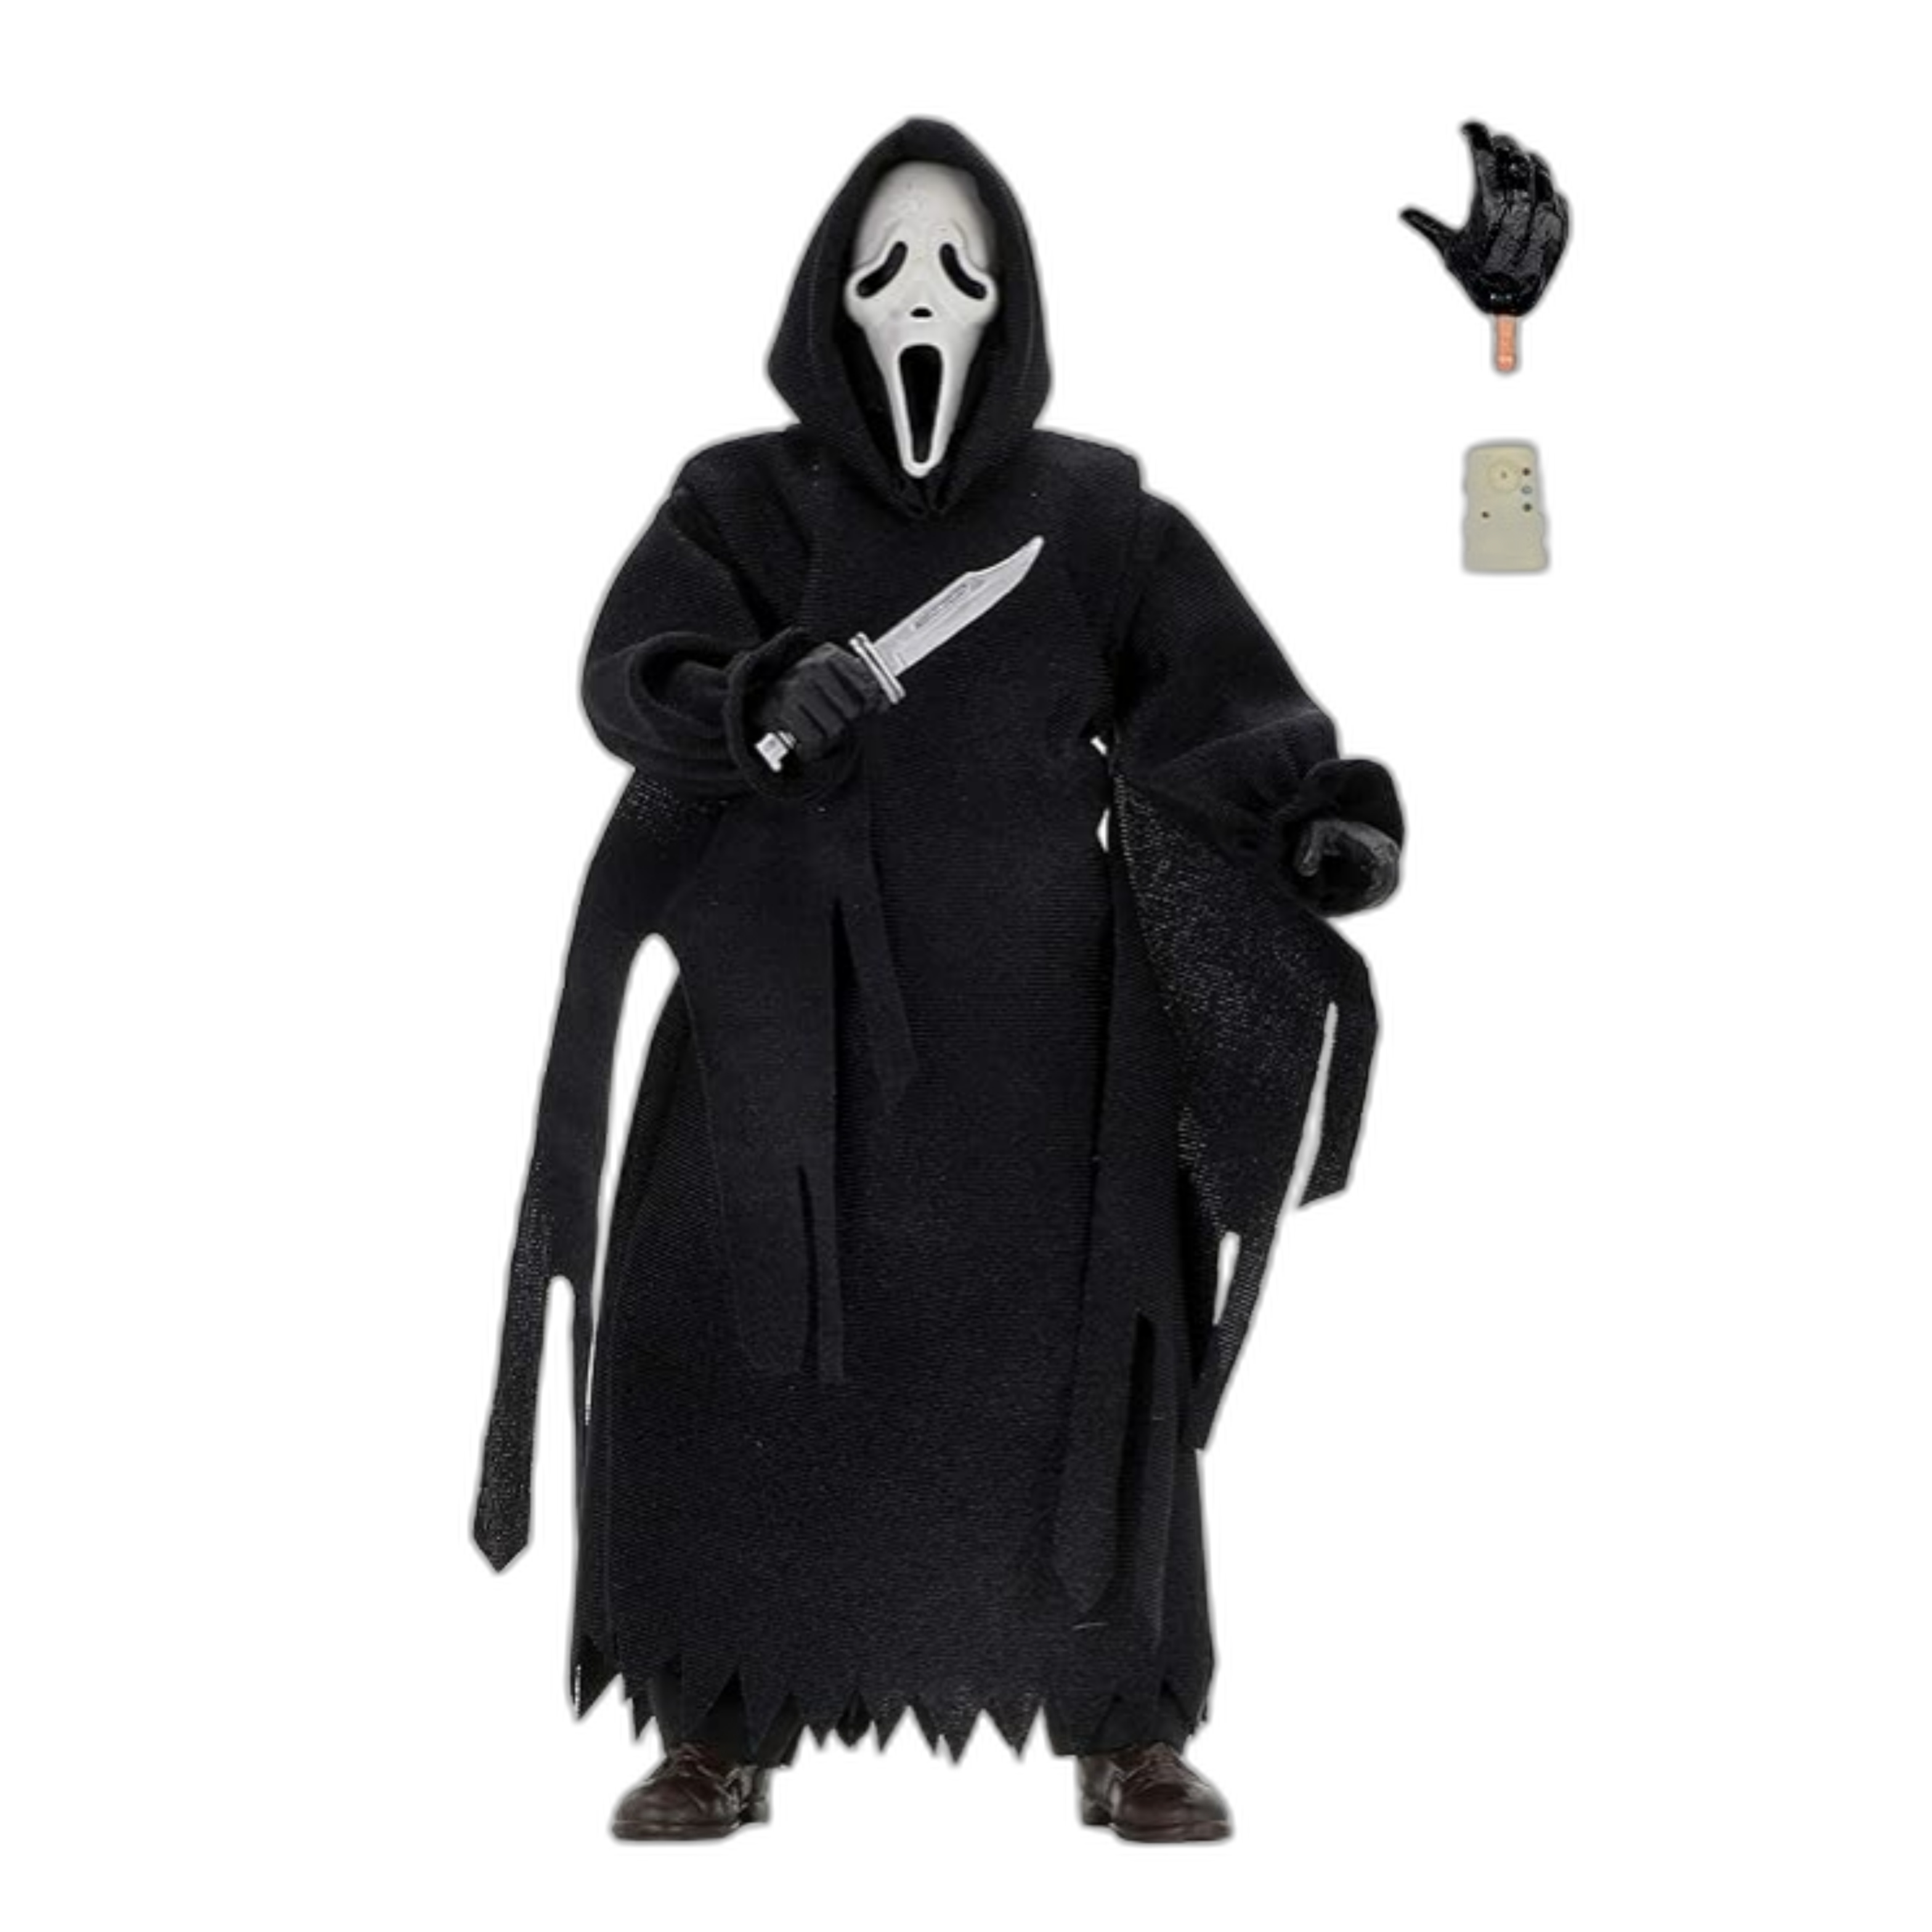 Ghostface action figure from the Scream franchise, complete with a movie accurate costume, iconic knife, replacable hand, and voice modulator prop.